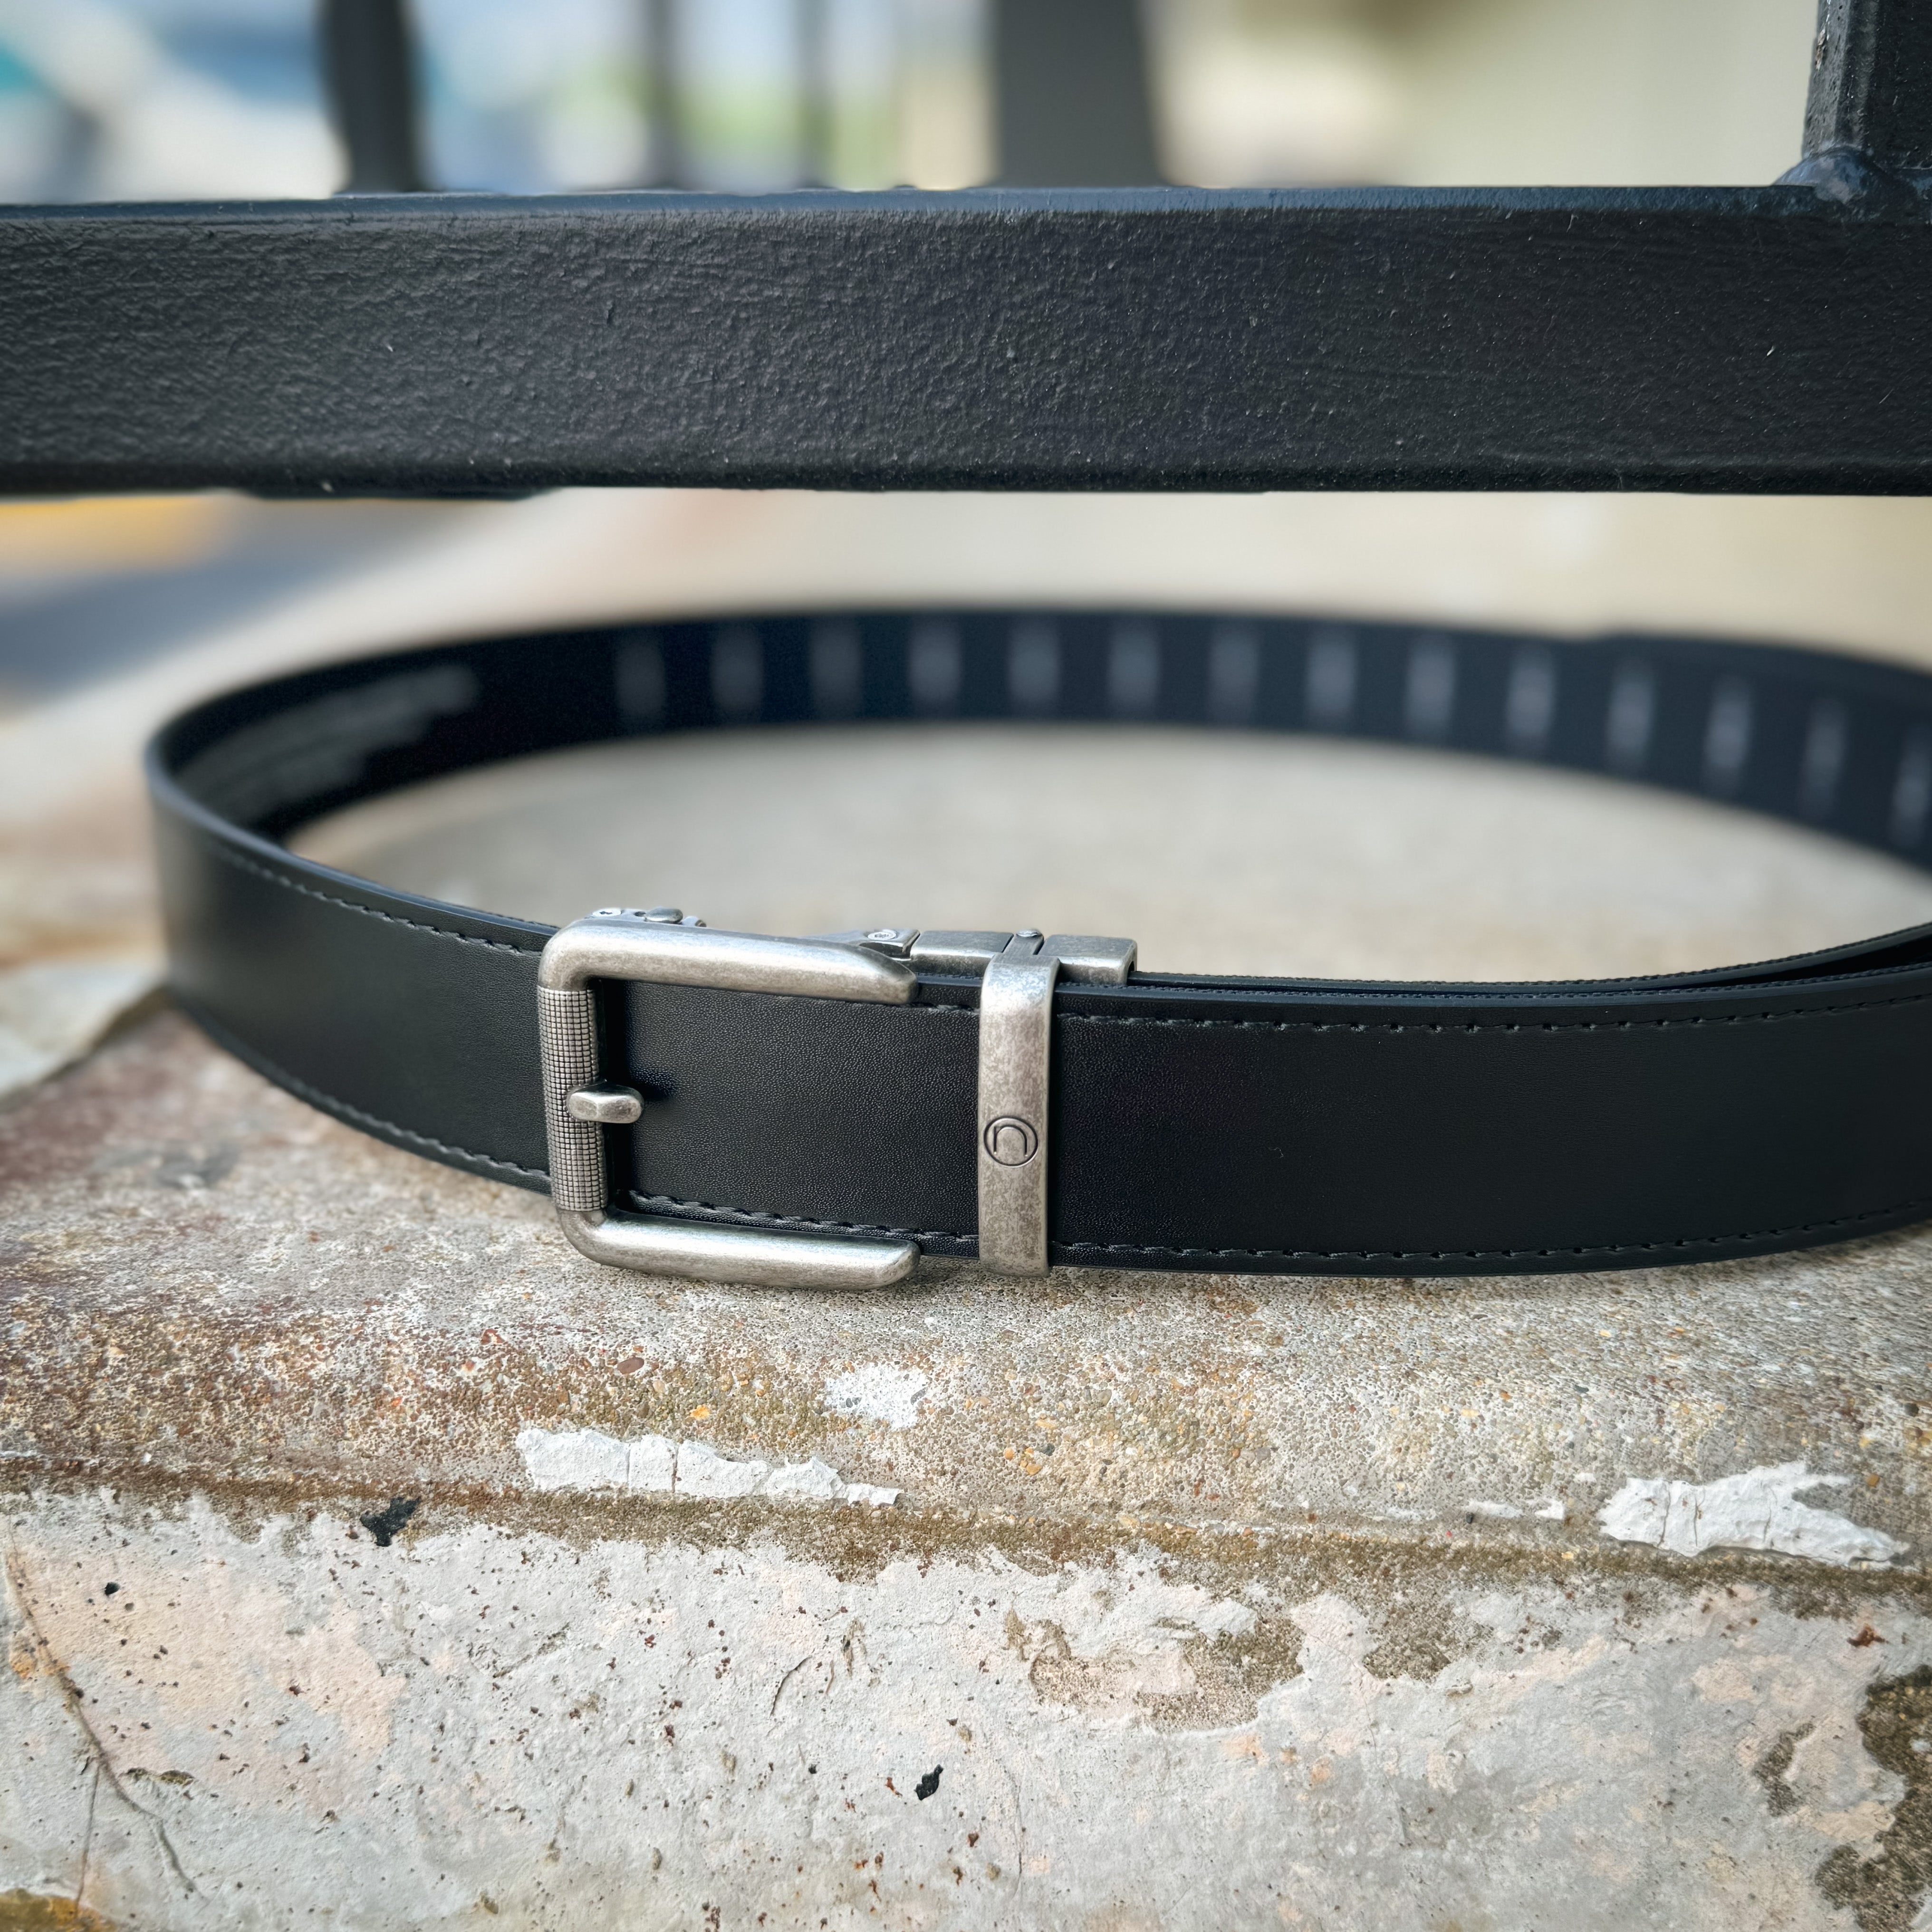 For the best black everyday carry  EDC Dress belt, shop Four Brothers Holsters. The Rogue belt has a classic rugged look that goes well with everyday wear like jeans or chinos. The knurled area of the buckle is a nice touch. These ratchet belts look like regular belts without the regular belt inconvenience.